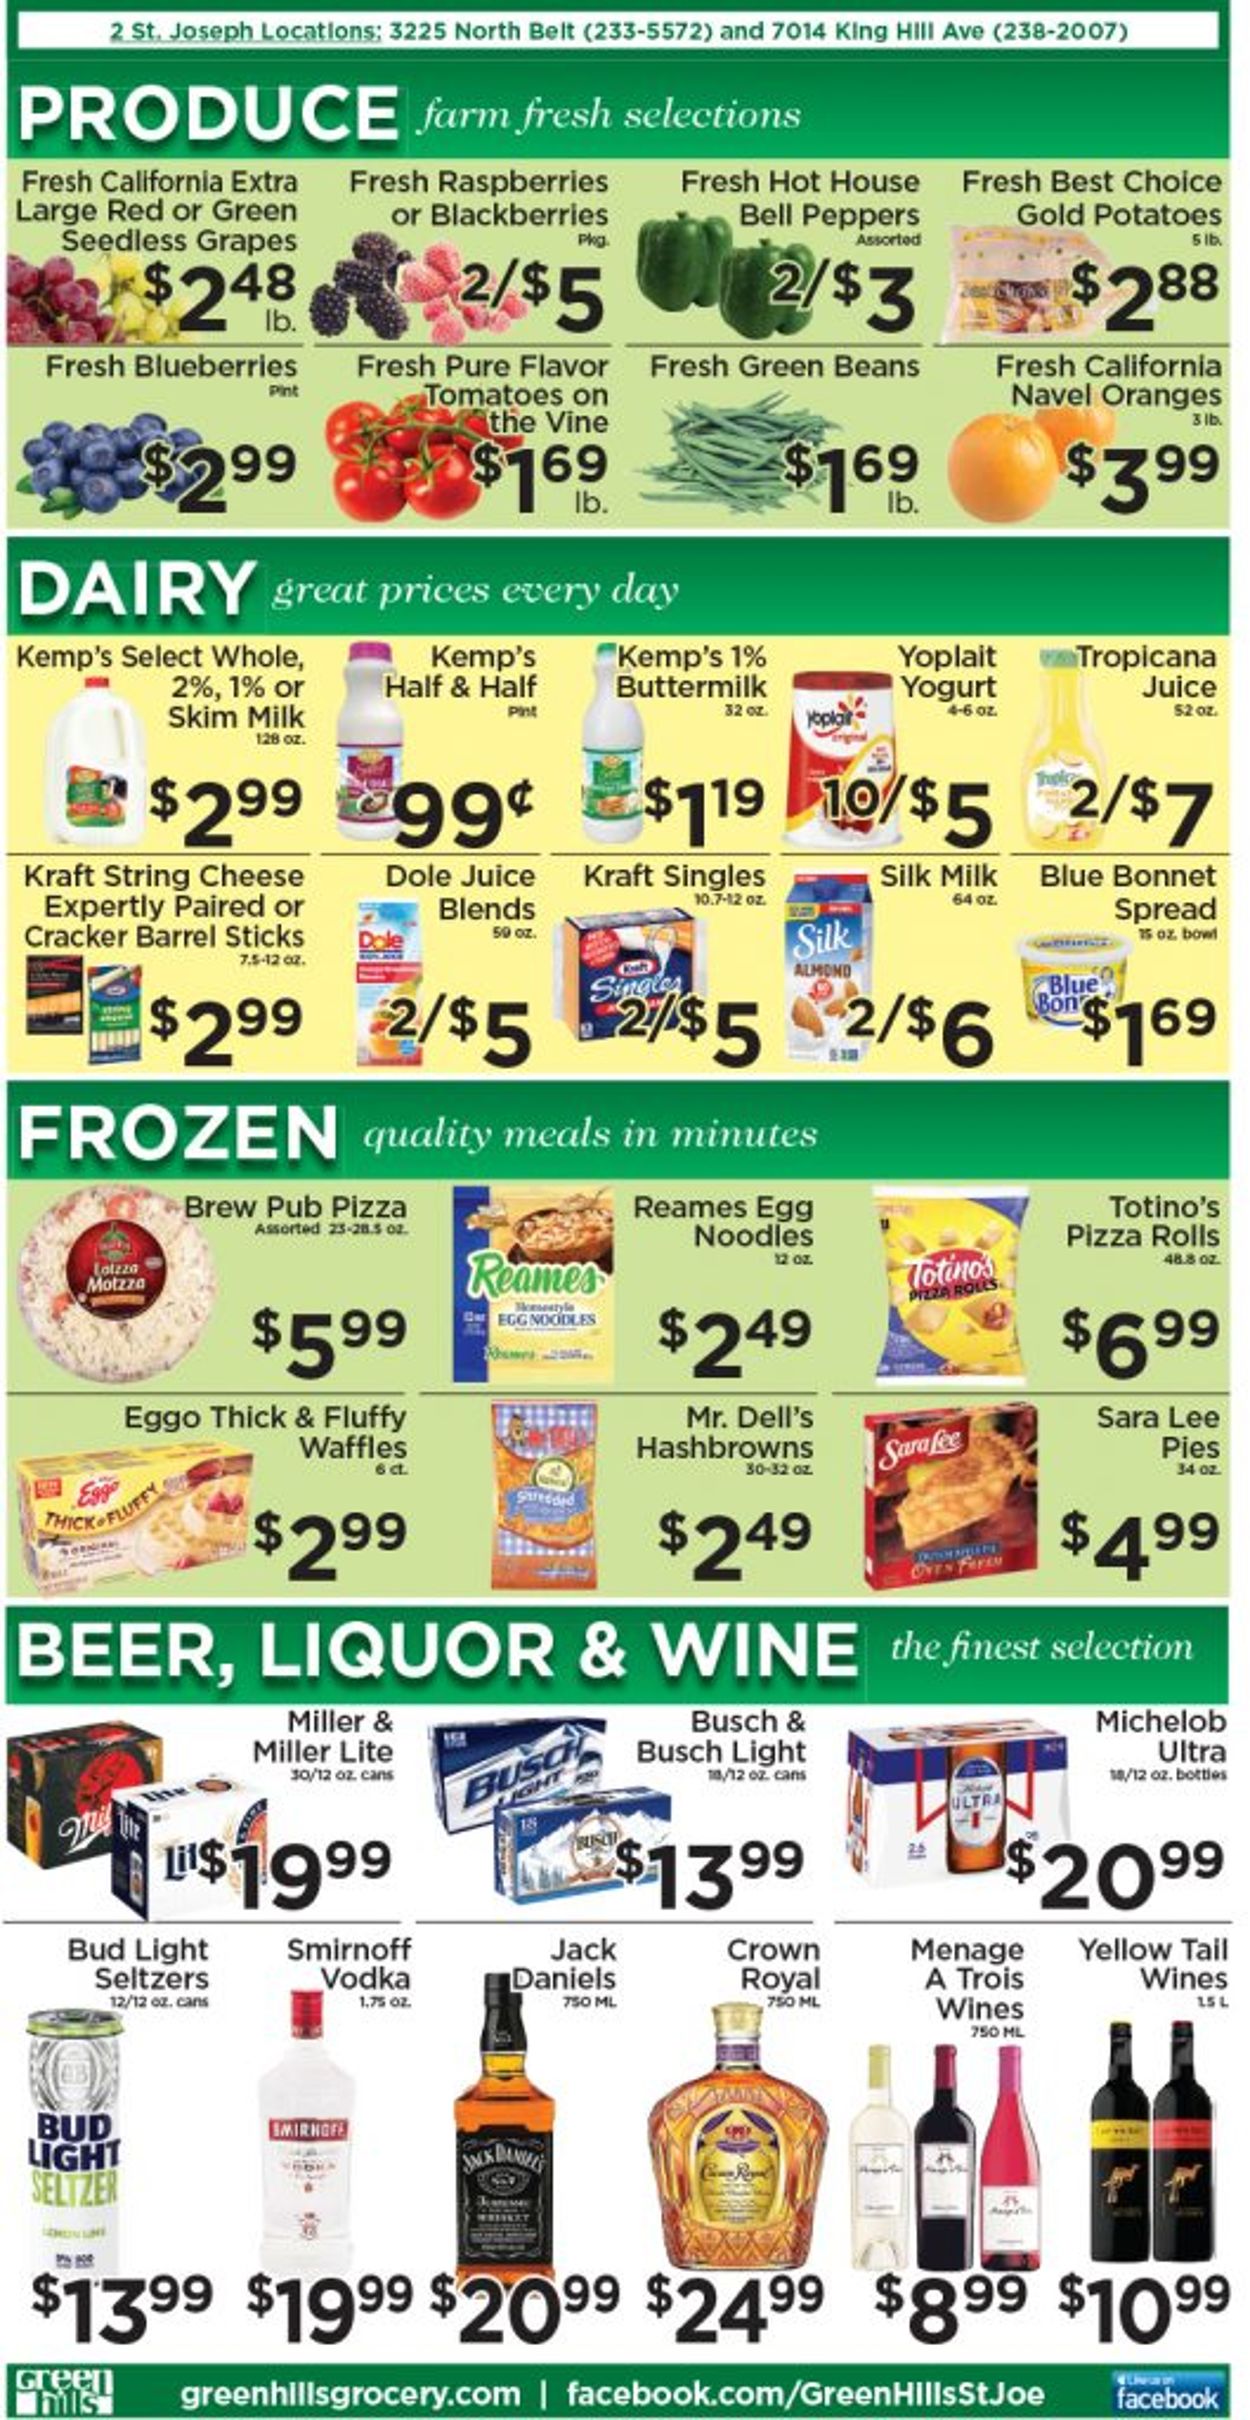 Green Hills Grocery HOLIDAY 2021 Weekly Ad Circular - valid 12/08-12/14/2021 (Page 2)